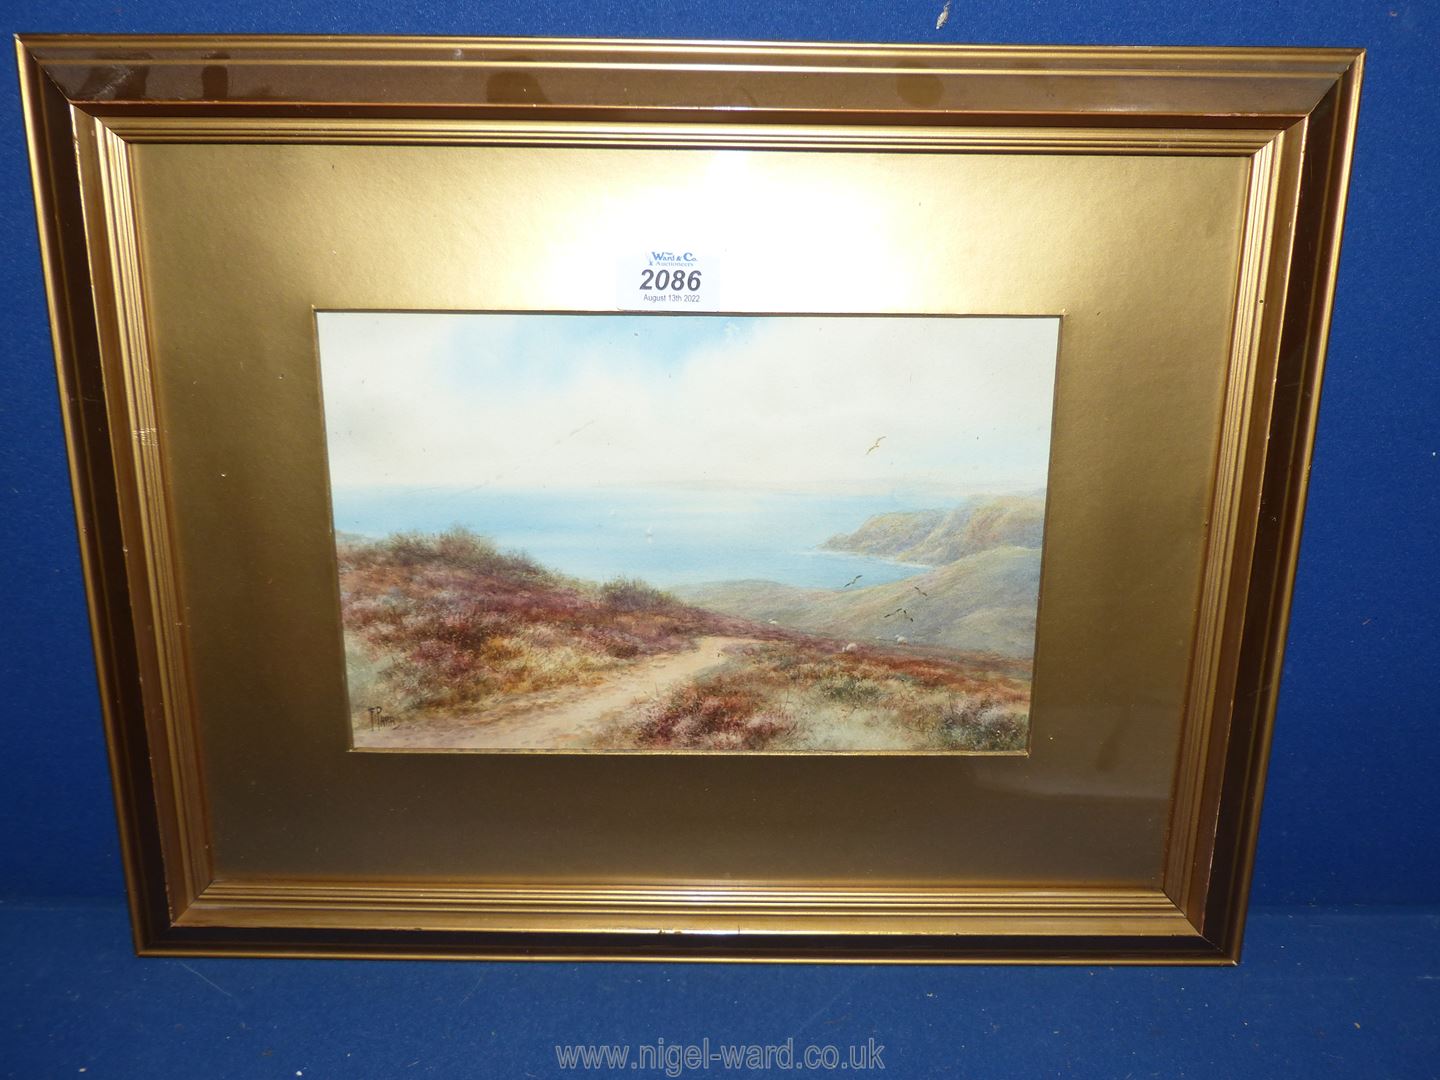 A framed and mounted watercolour depicting a coastal scene, signed lower left 'F. Parr'.